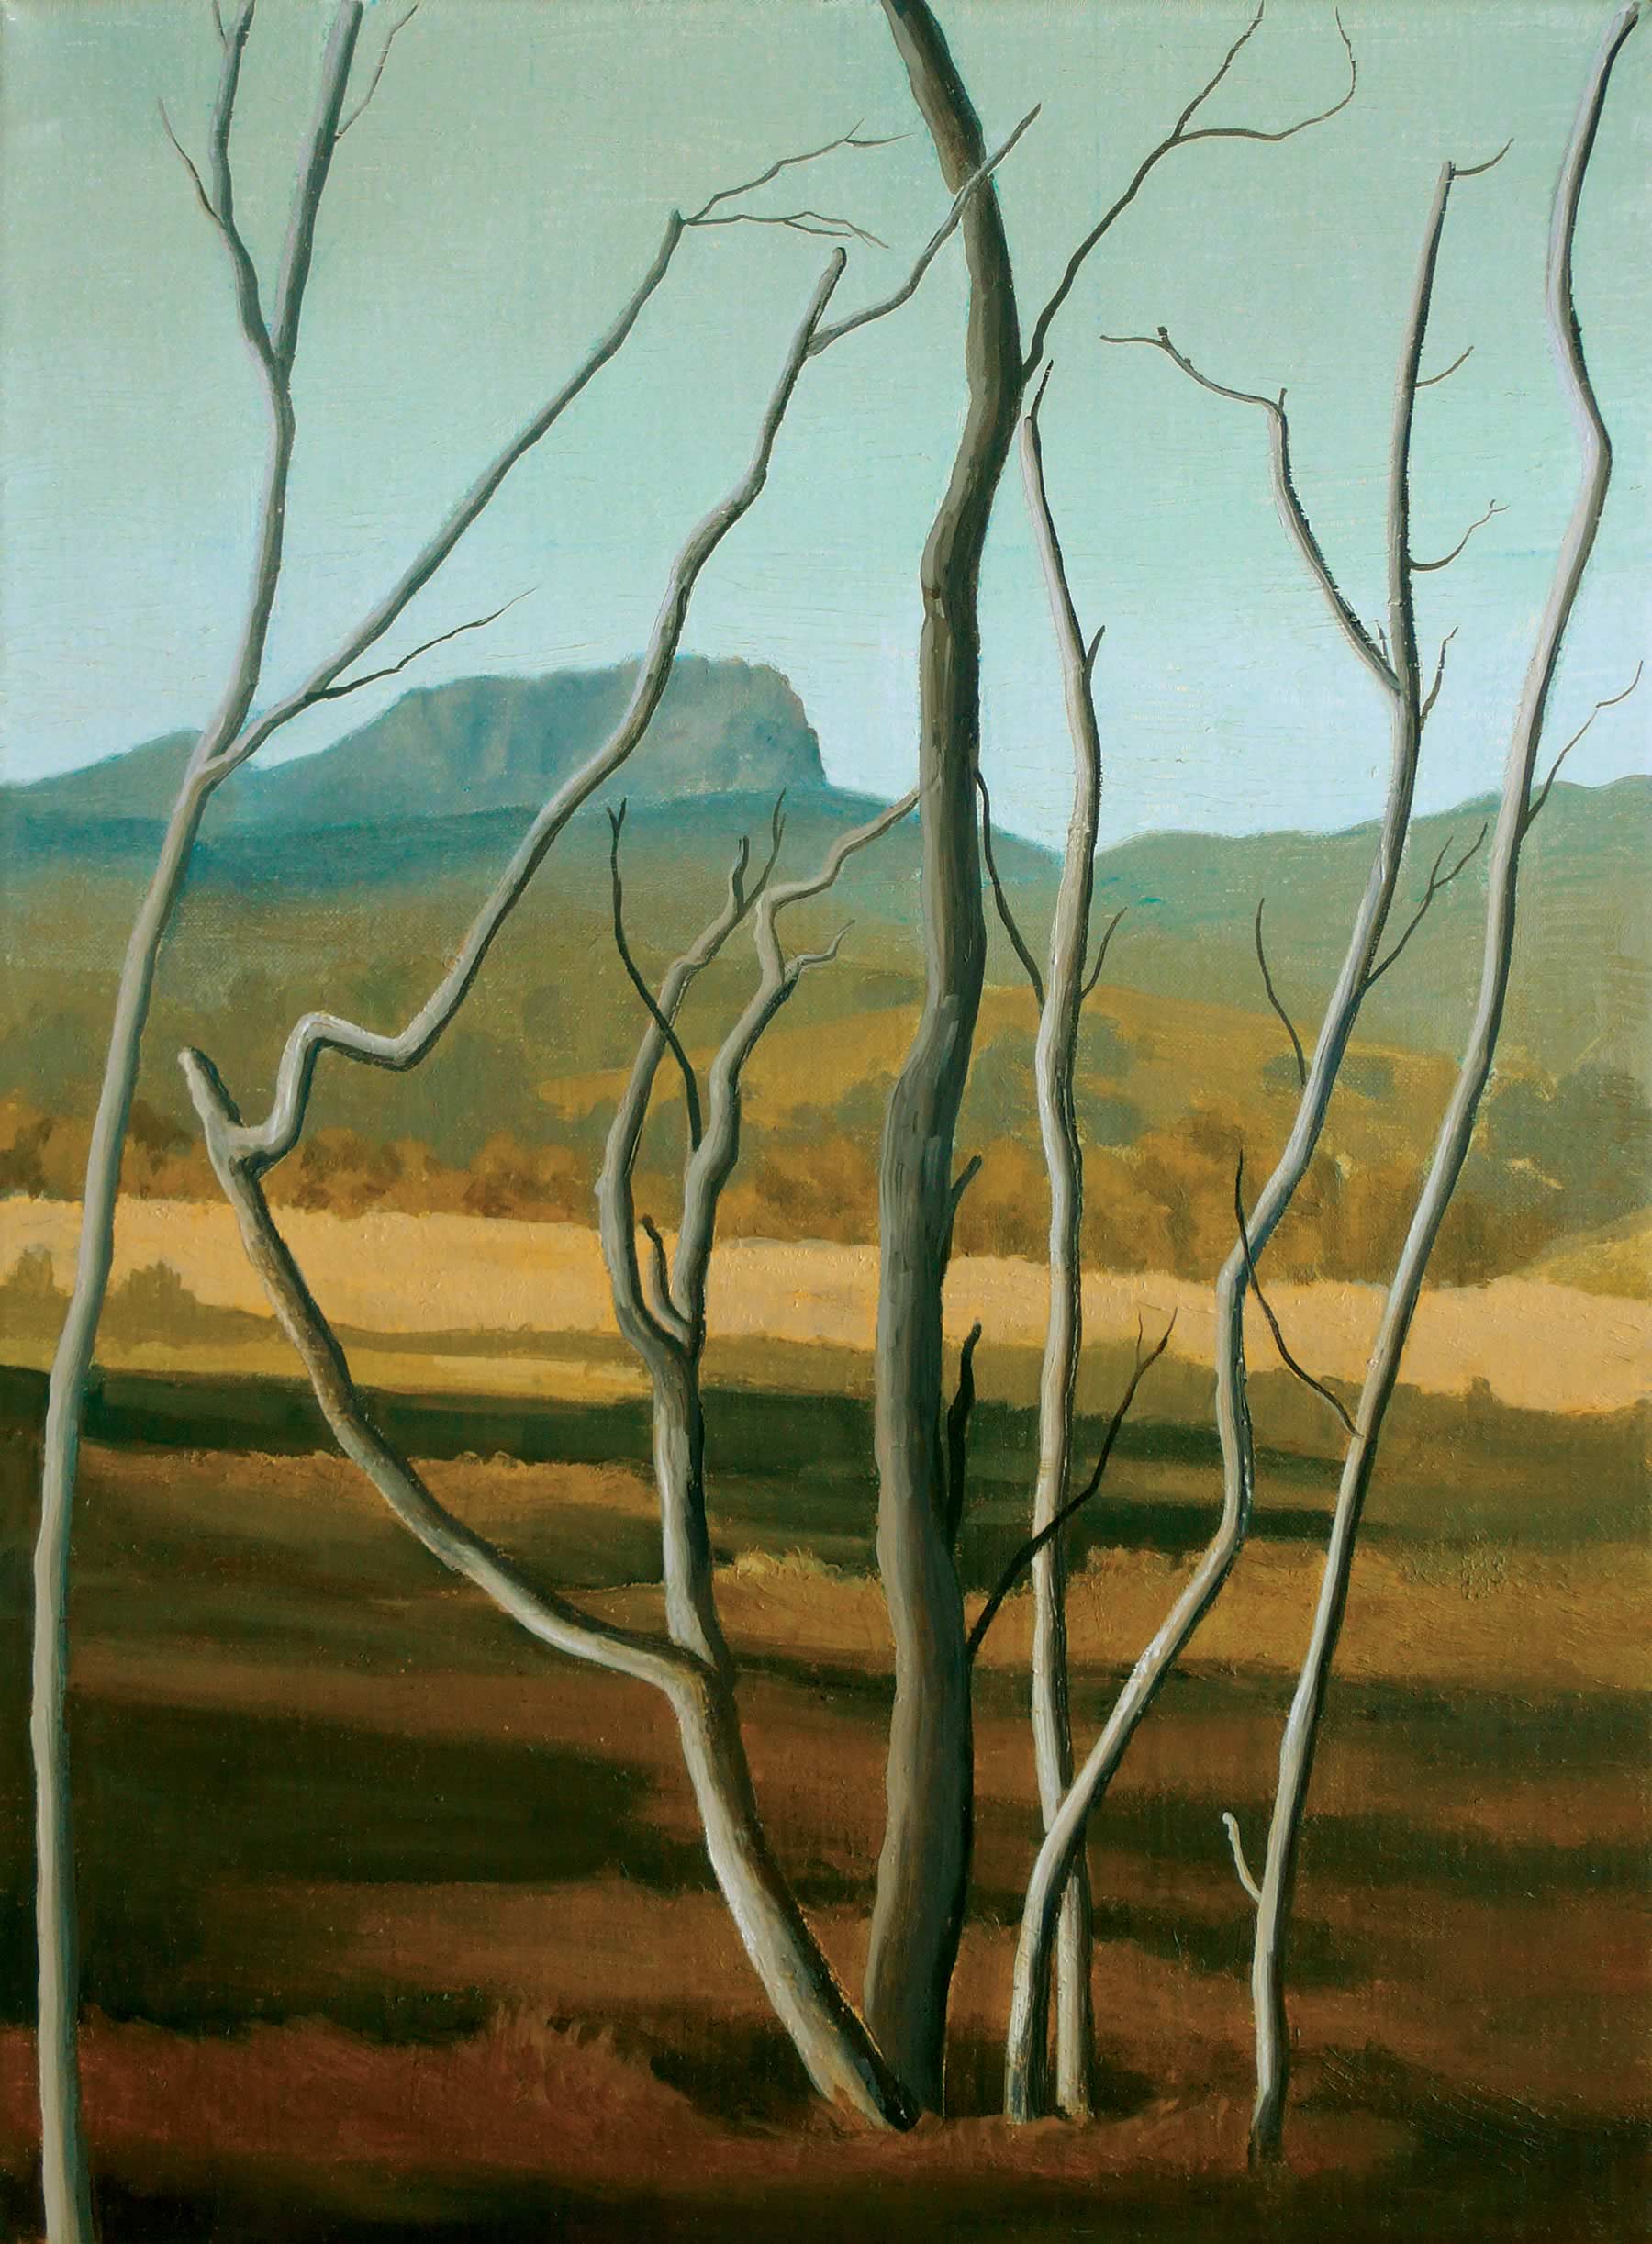 Painting by artist David Keeling, titled Uplands (2007) showing a stand of small dead eucalyptus tree trunks in the foreground and a heathland that gives way to a mountain range in the distance.